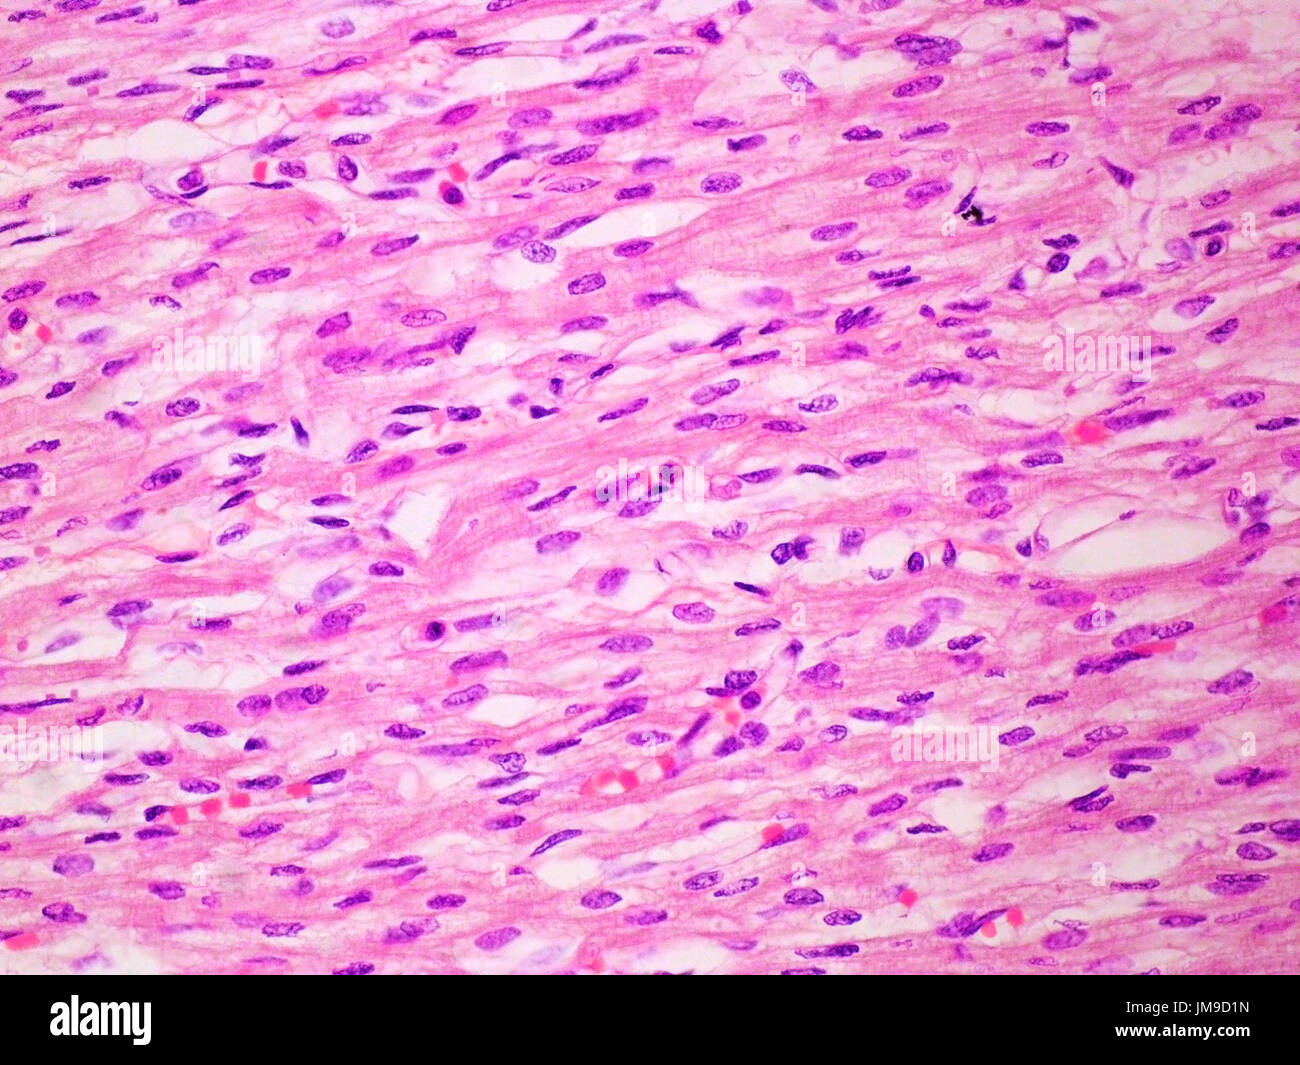 Heart Muscle Striation Viewed at 400x Magnification with Haemotoxylin and Eosin Staining. Stock Photo